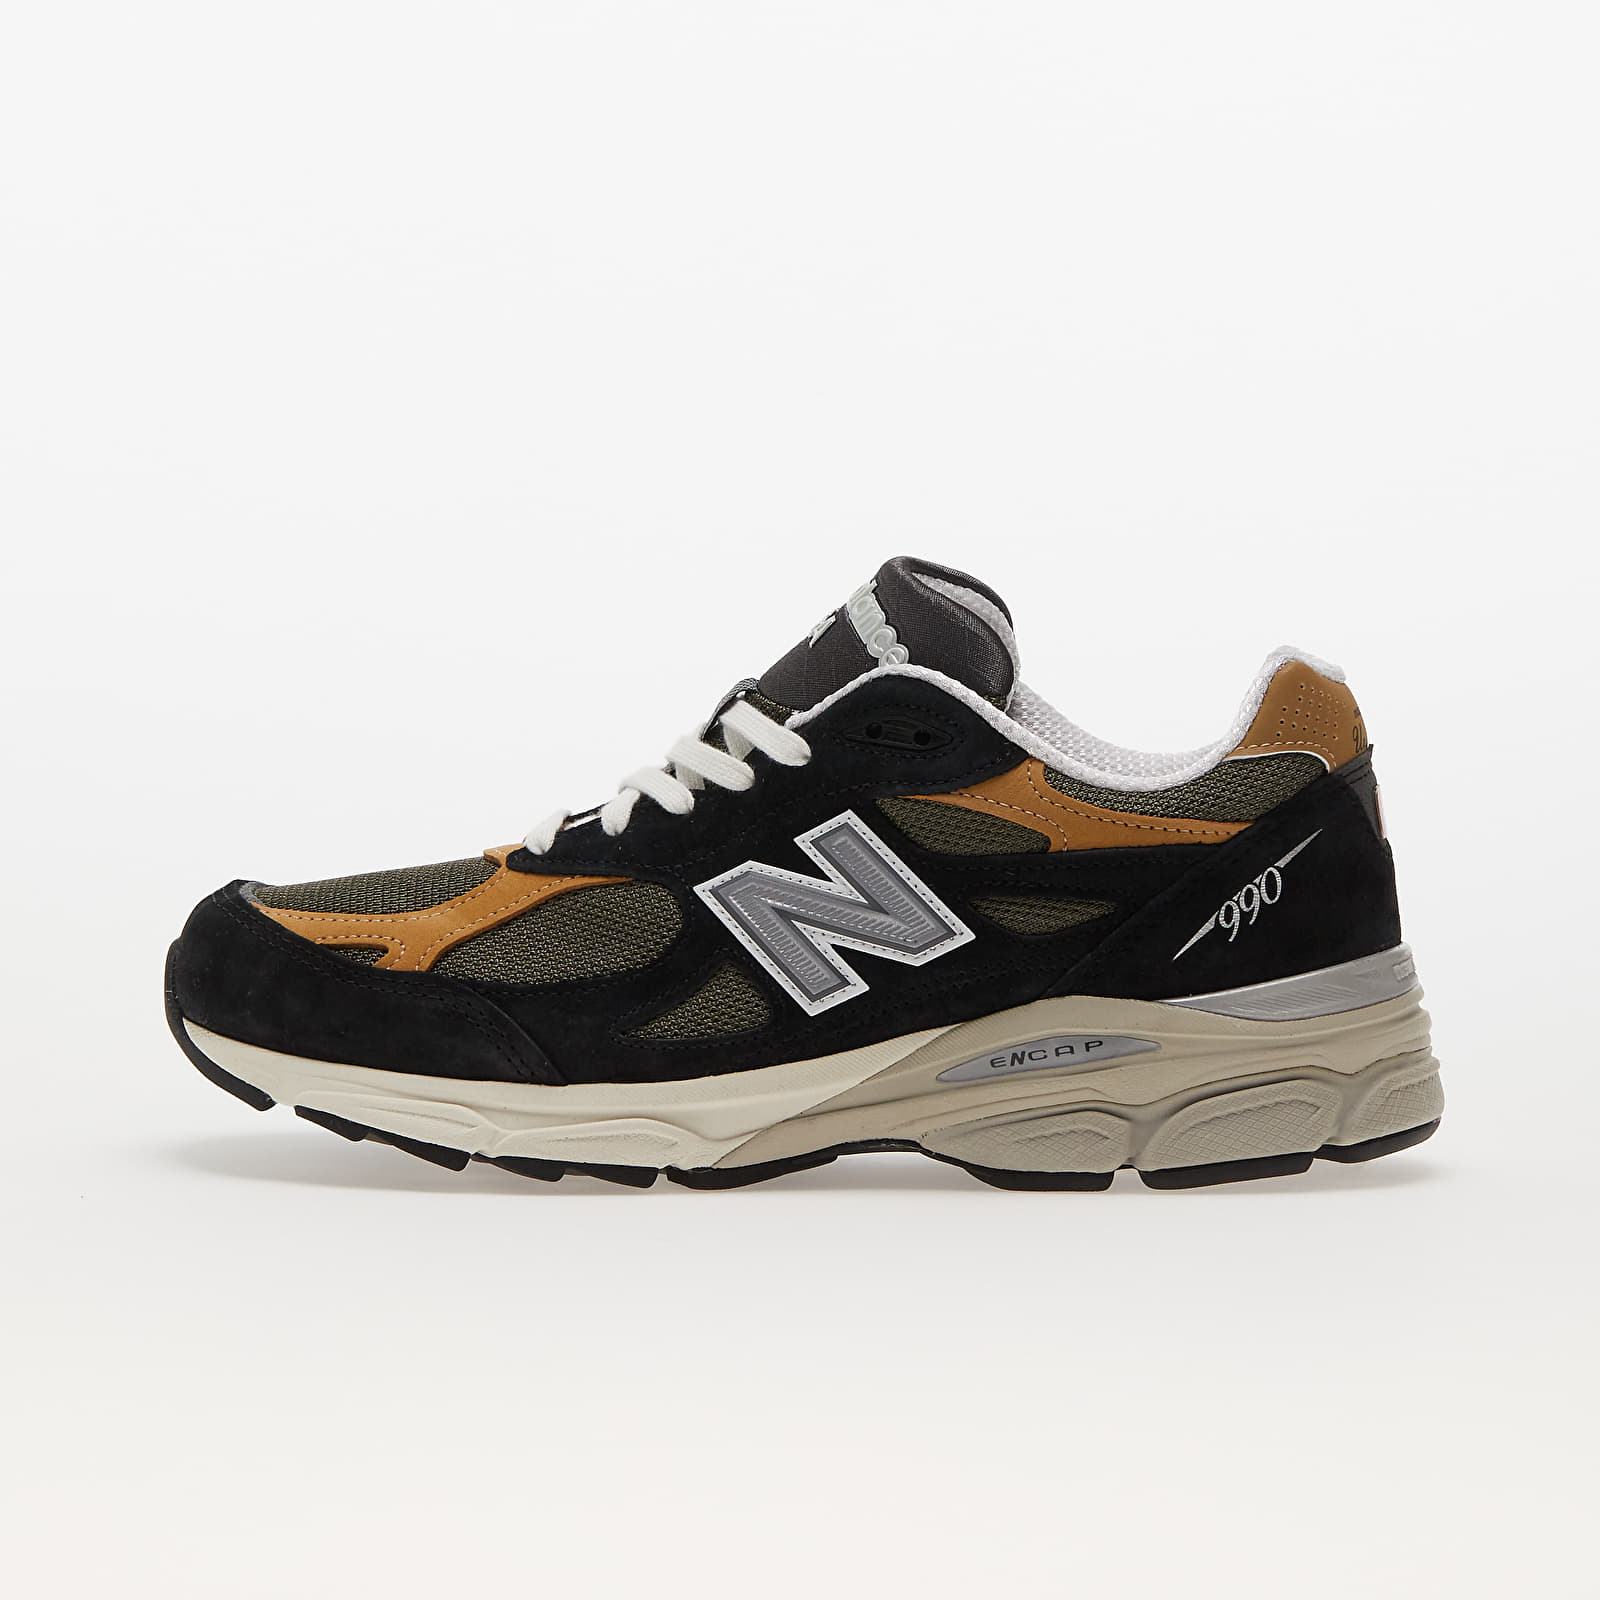 Men's shoes New Balance 990 V3 Made in USA Black